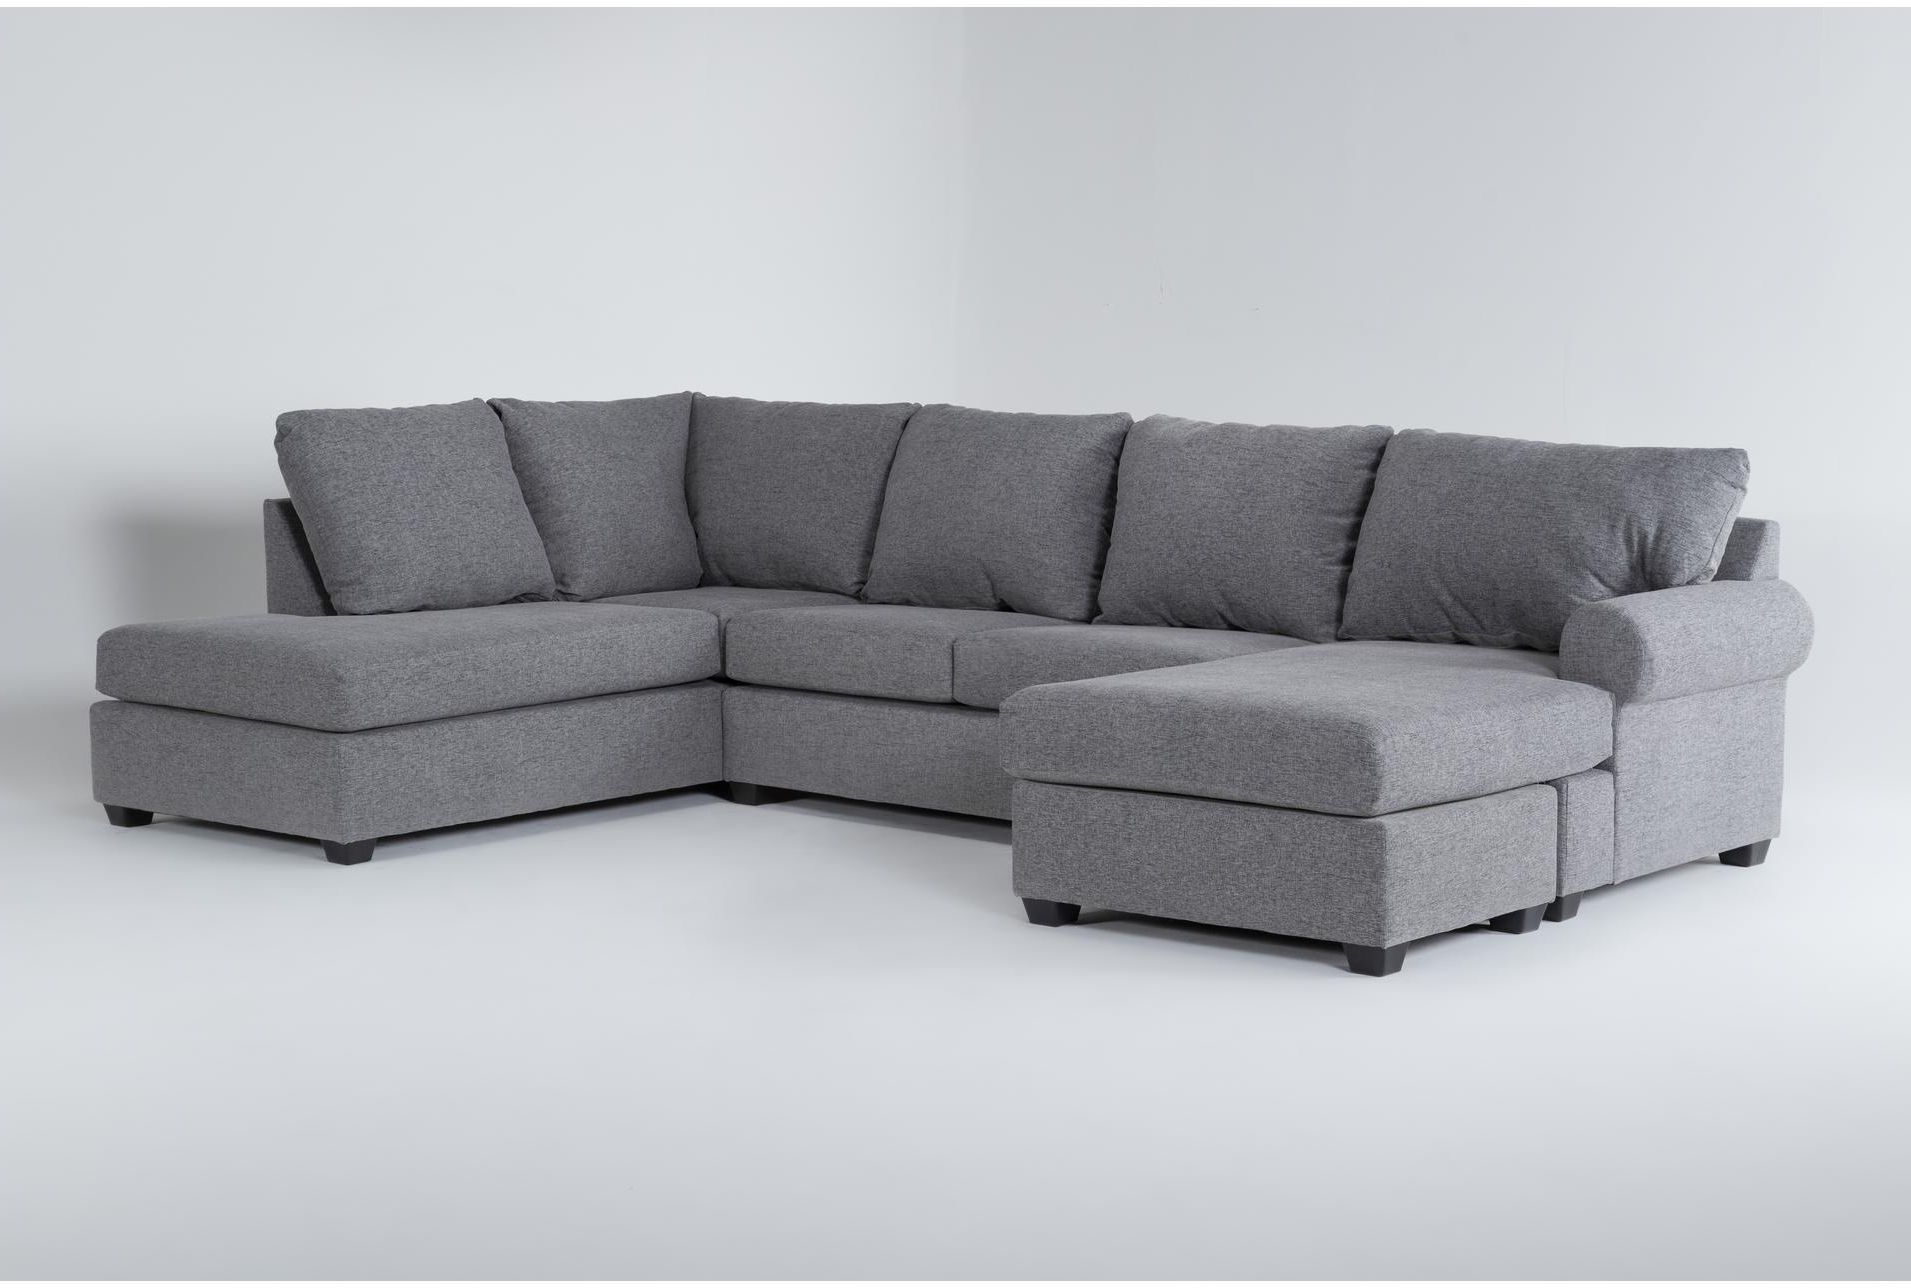 Hampstead Graphite 137" 2 Piece Sectional With Left Arm Facing Sleeper In Left Or Right Facing Sleeper Sectionals (View 11 of 20)